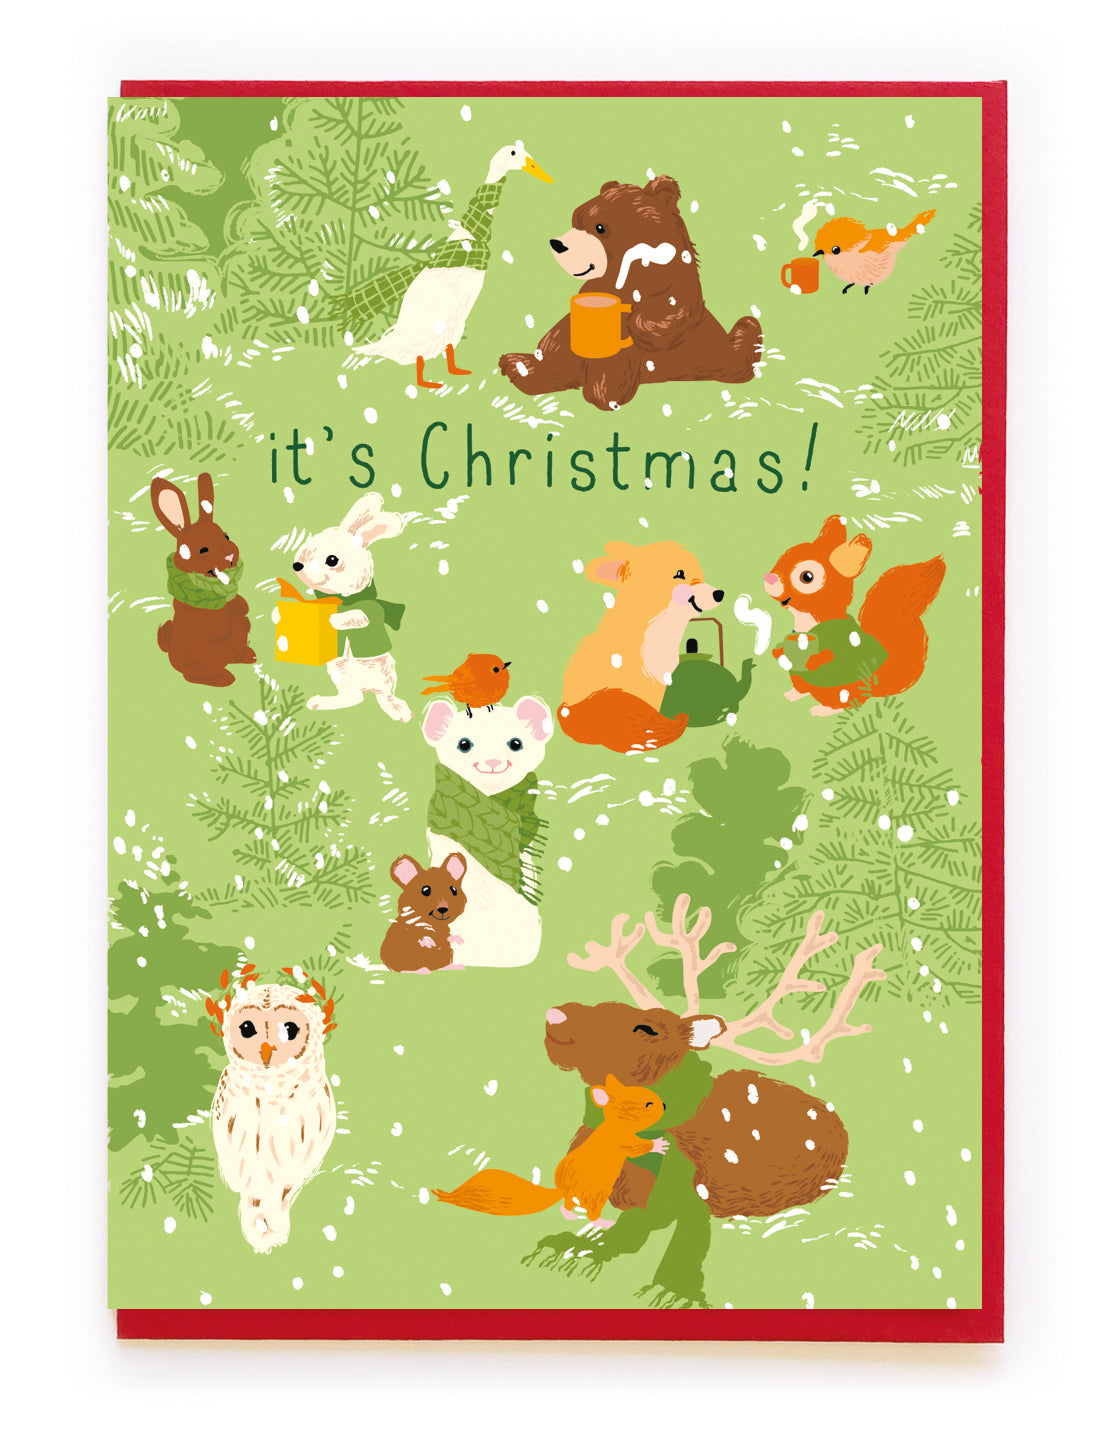 IT'S CHRISTMAS! WINTER ANIMALS | CARD BY NOI